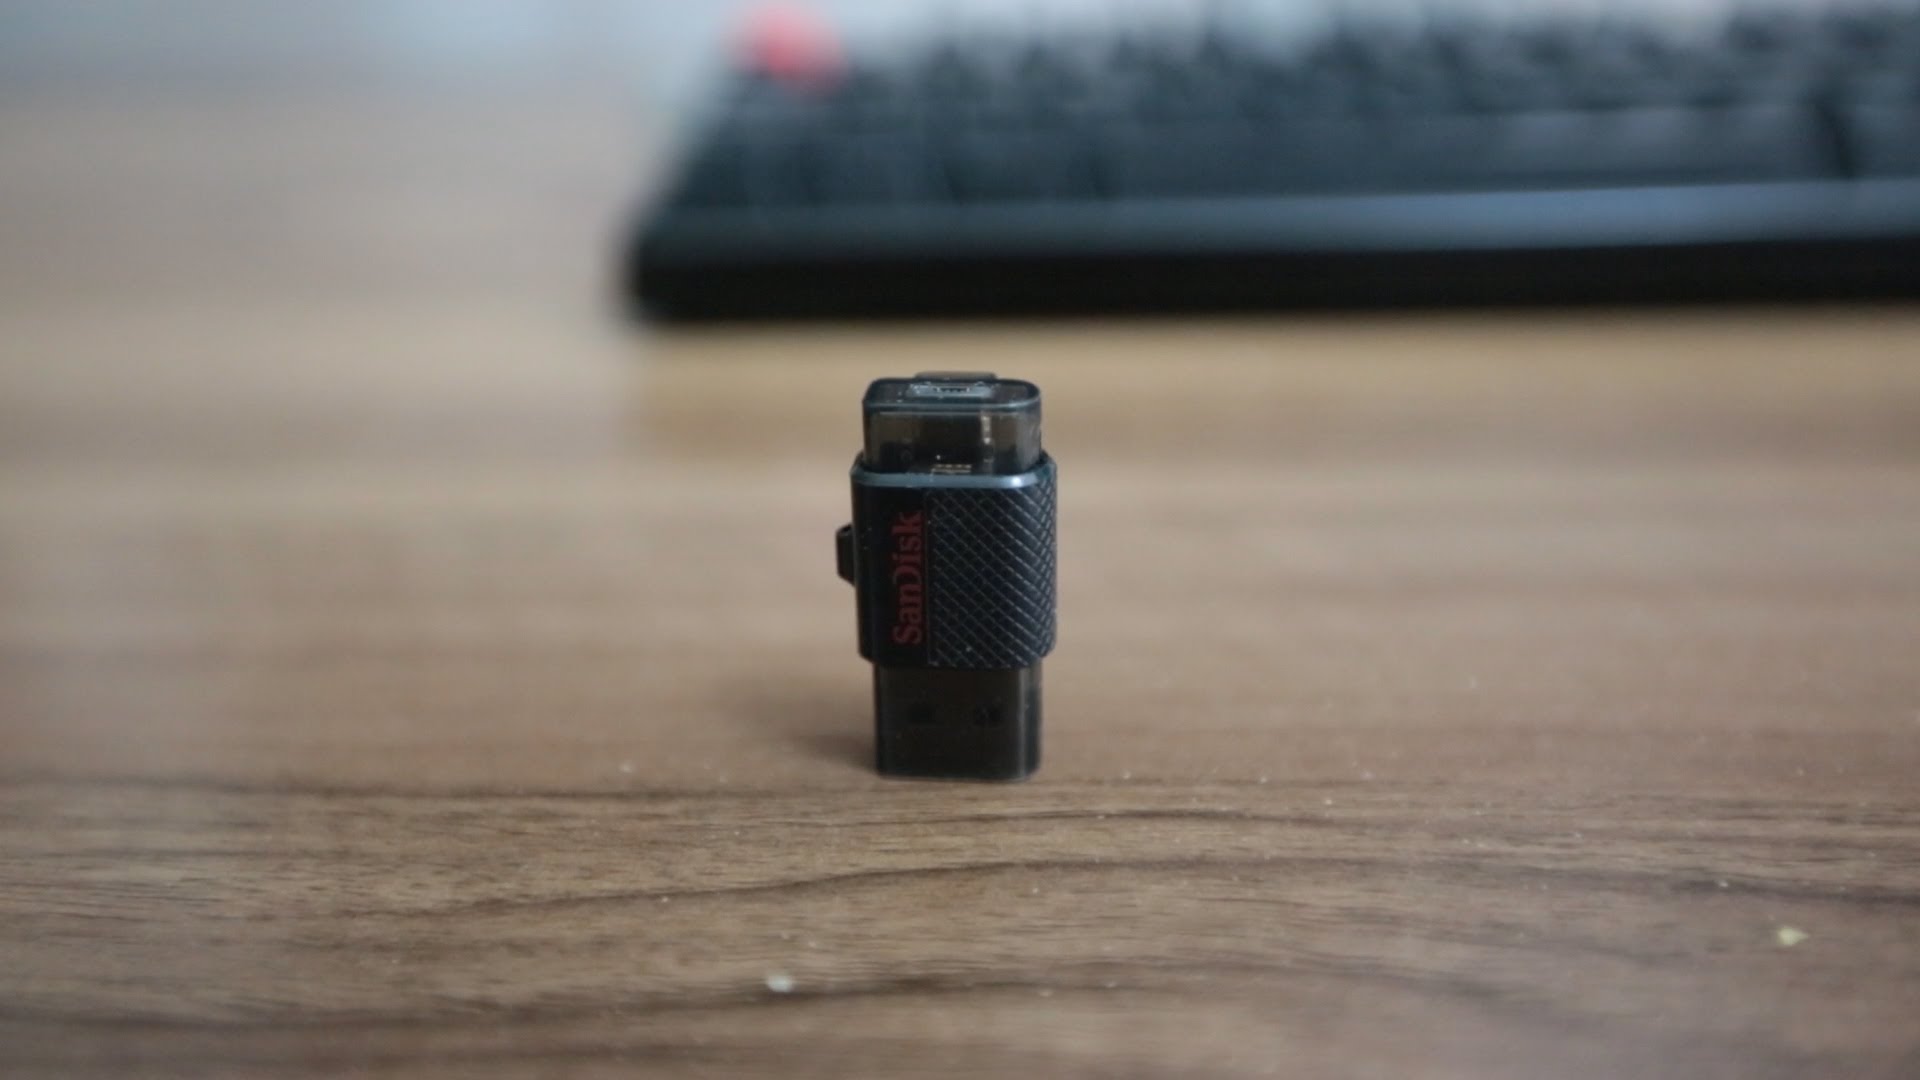 Review: SanDisk Dual USB Drive